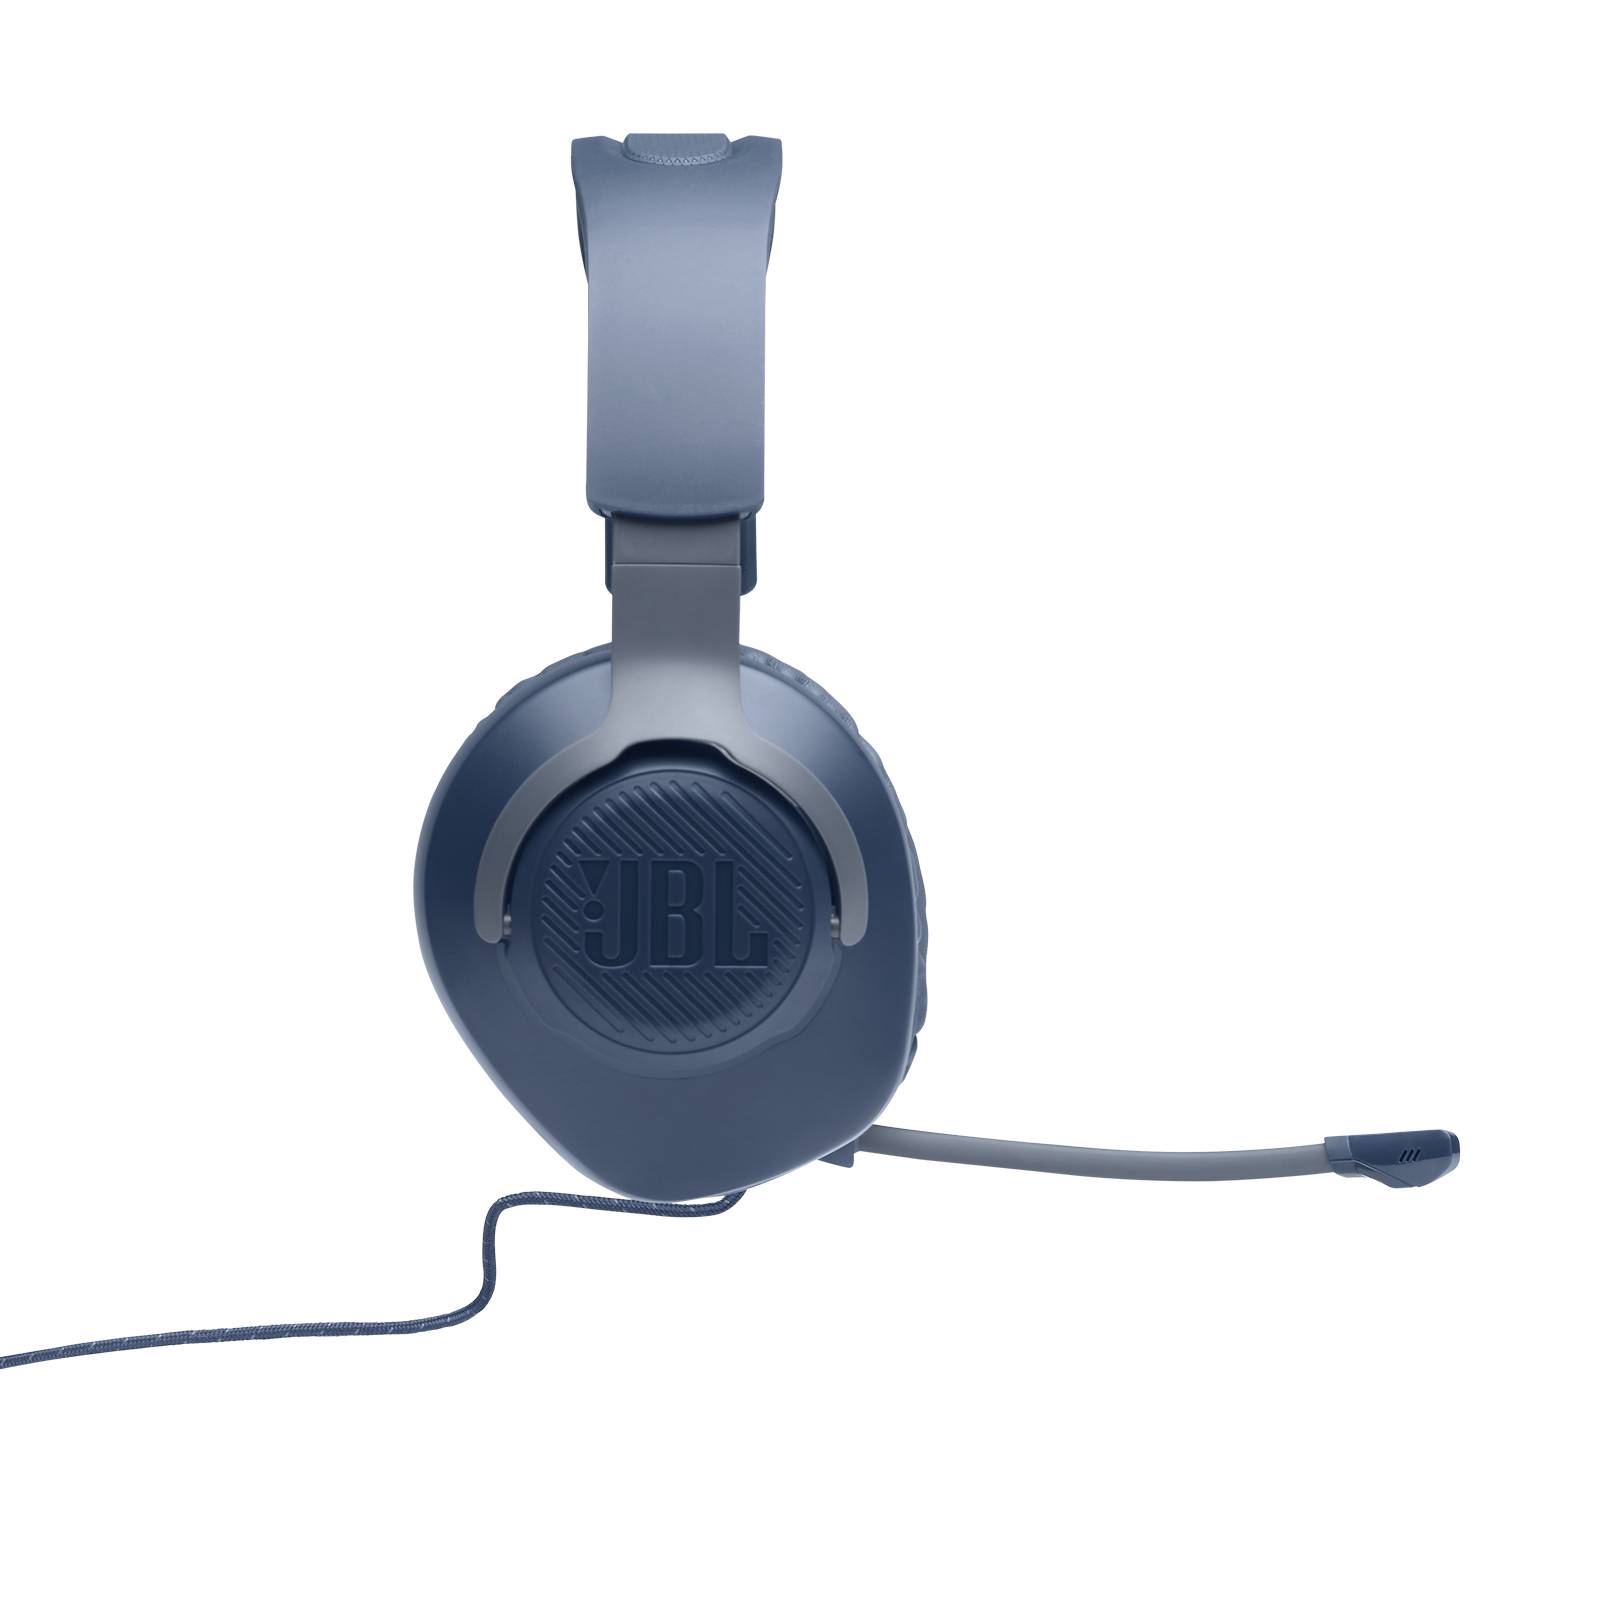 JBL Quantum 100 - Blue - Wired over-ear gaming headset with flip-up mic - Detailshot 6